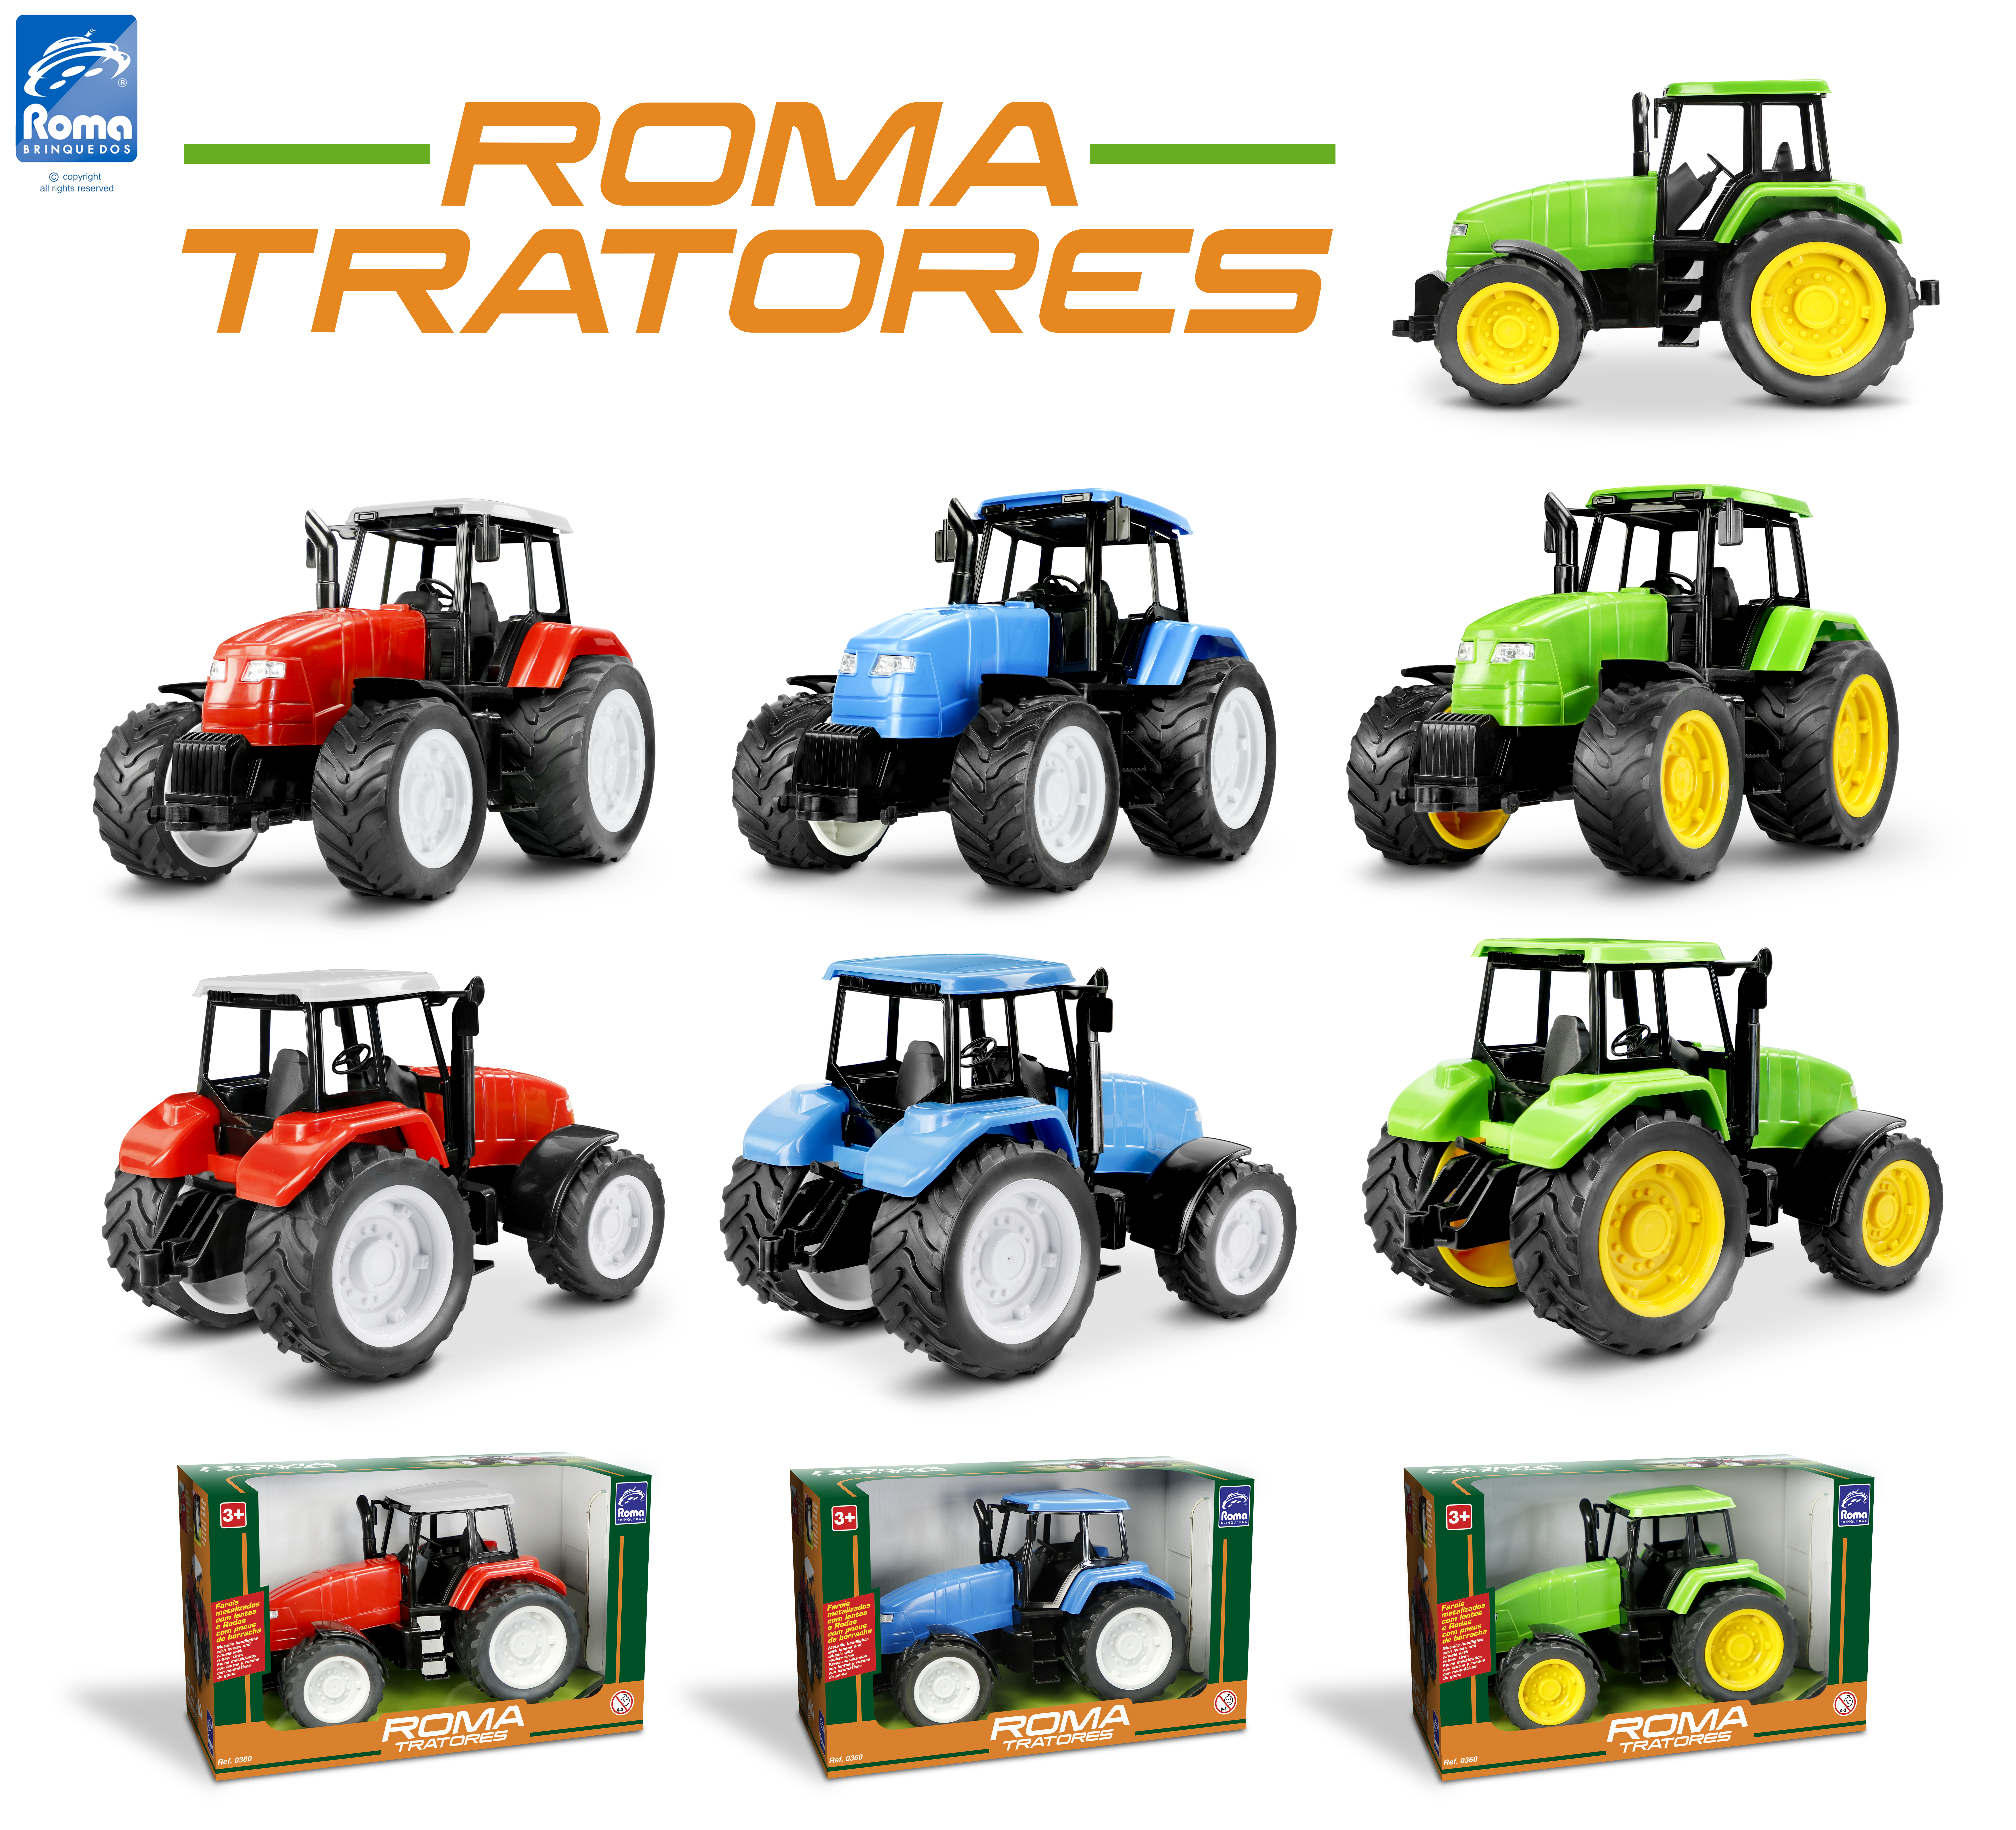 0360 - Roma Tratores - Trator.png